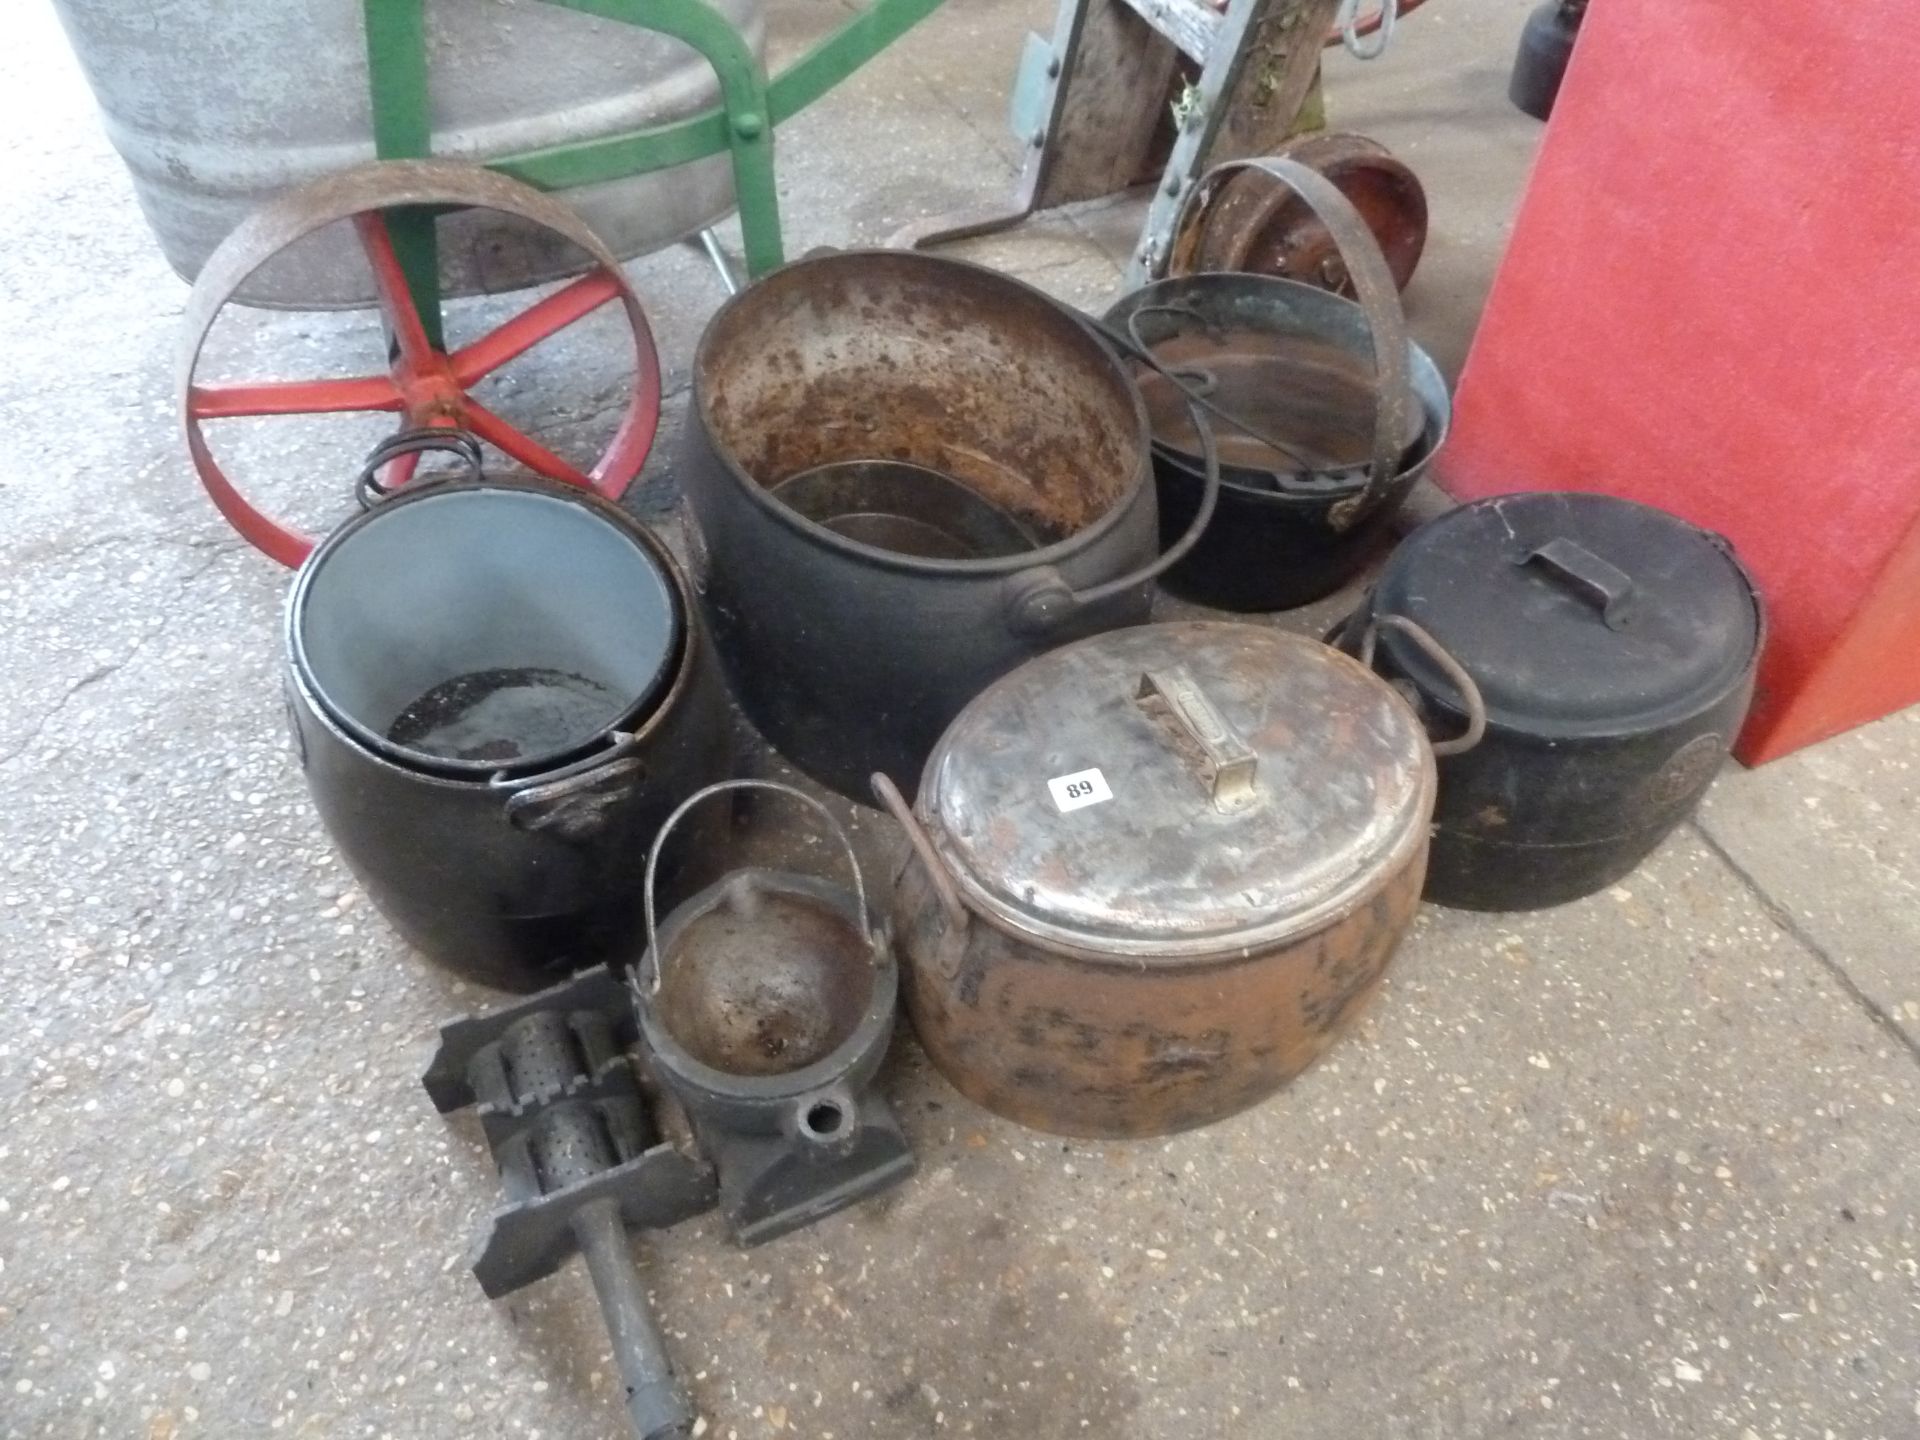 5 large metal oval containers/measures, 2 heavy buckets, smelter and grinder